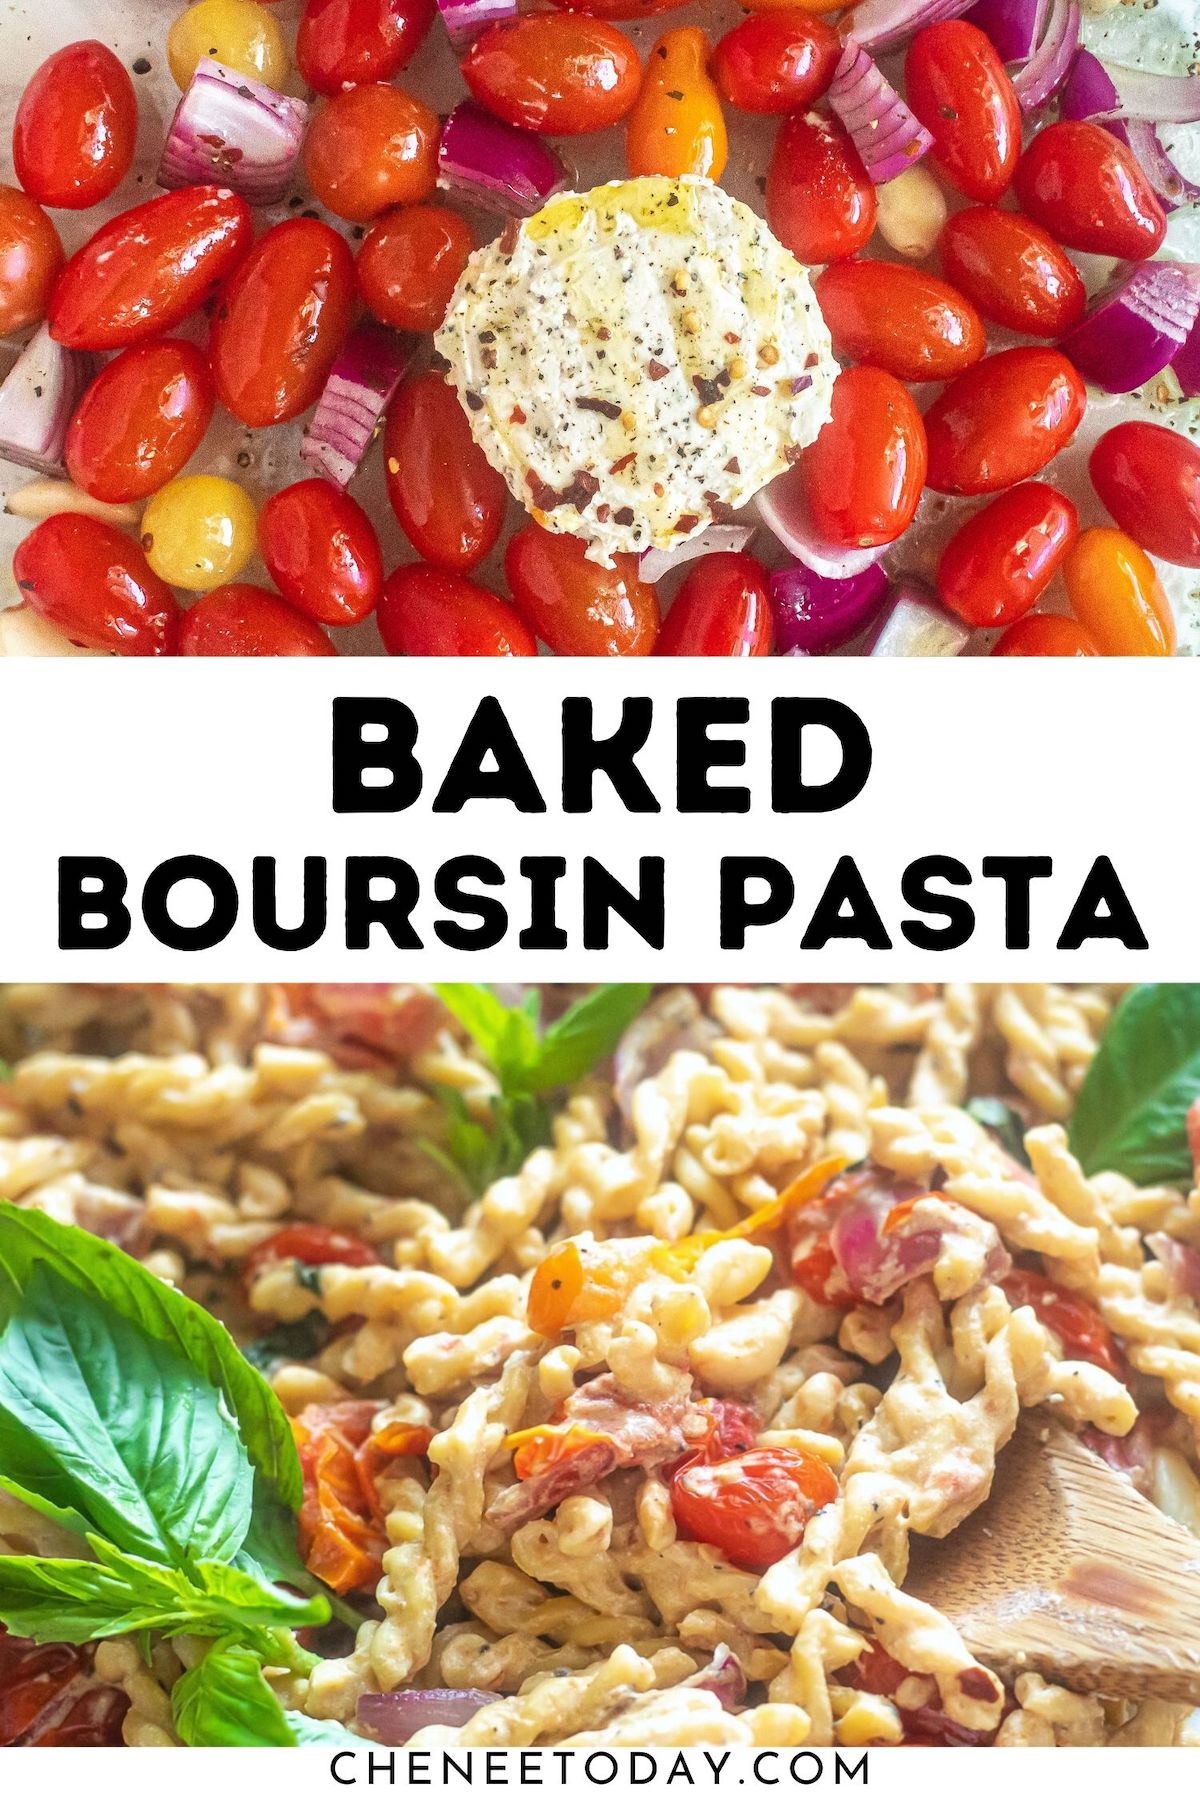 shots of baked boursin pasta recipe before and after baking